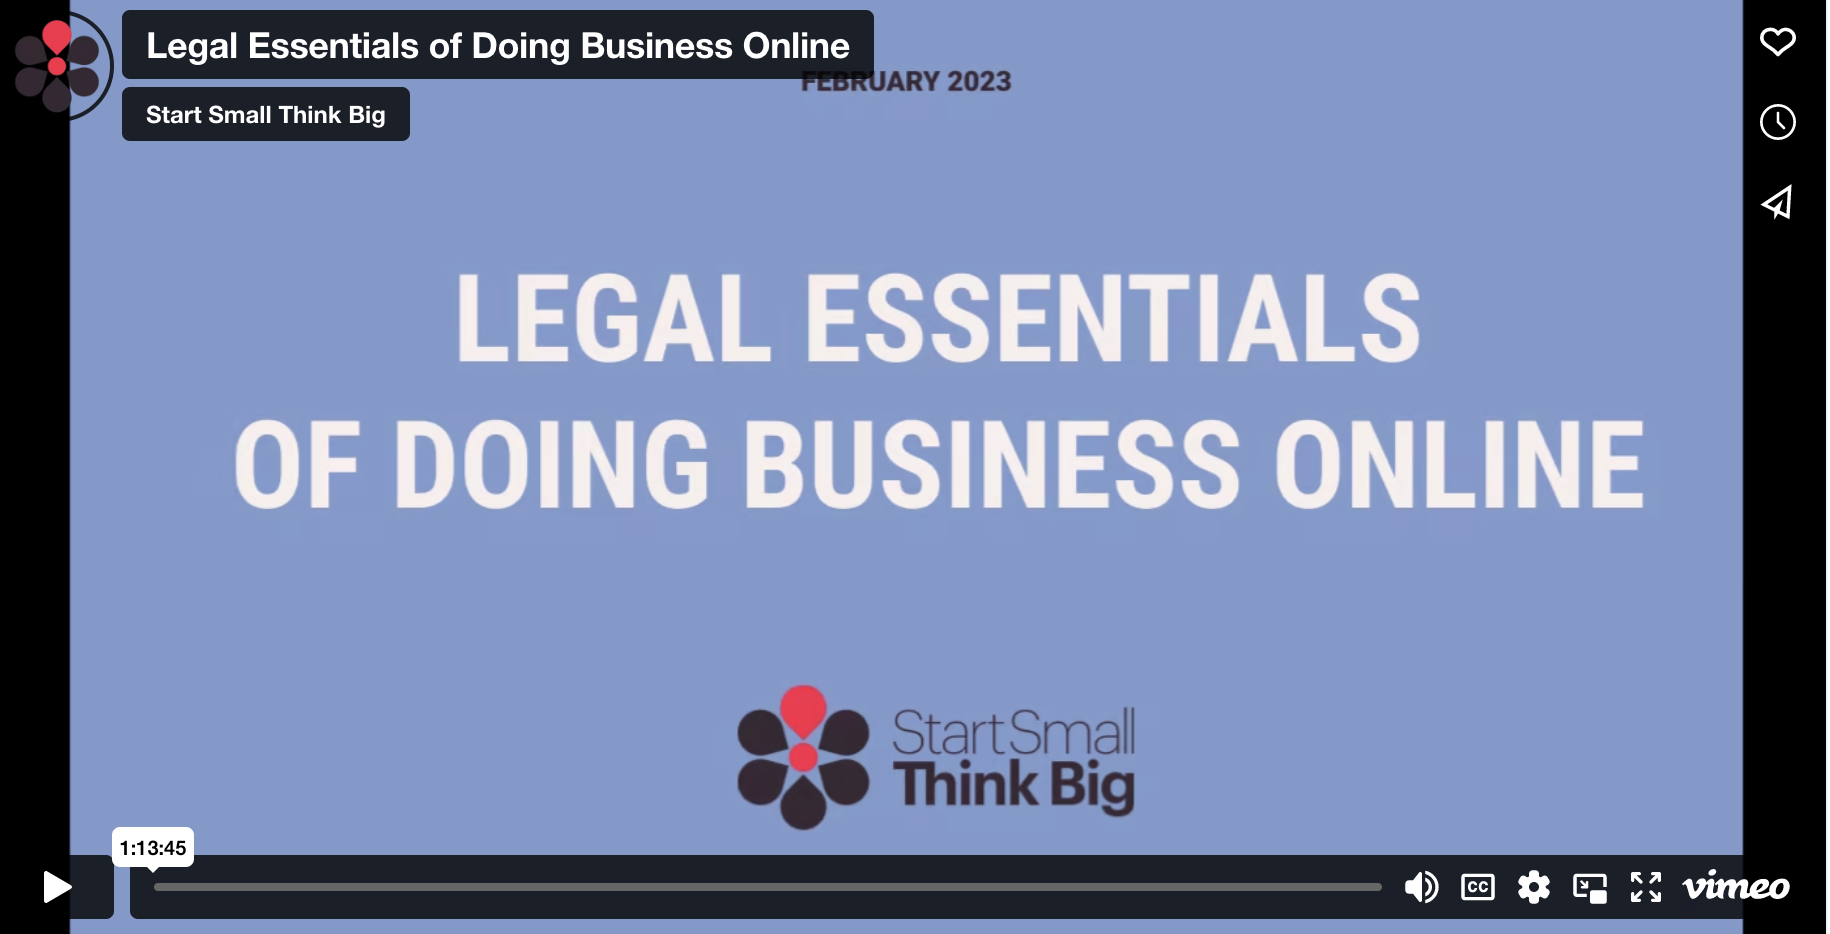 Legal Essentials of Doing Business Online